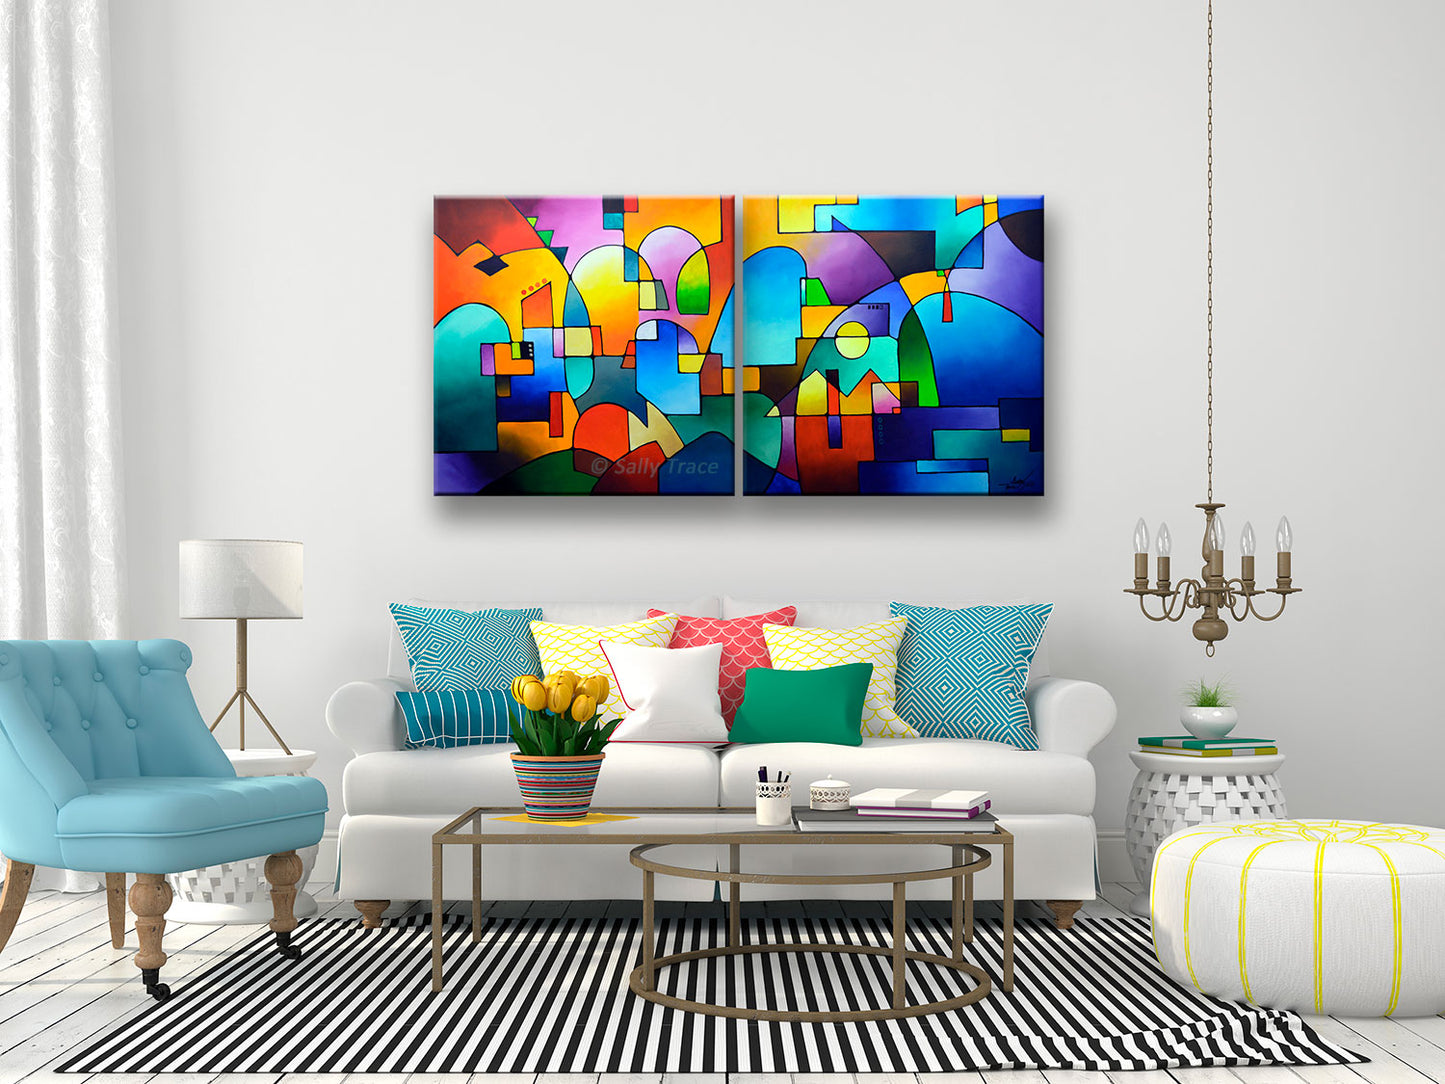 Giclee prints on stretched canvas made from my original abstract painting "Urbanity Vista". These stretched canvas giclee prints are made from my original abstract diptych painting, one of my Urbanity Series paintings and prints, room view.